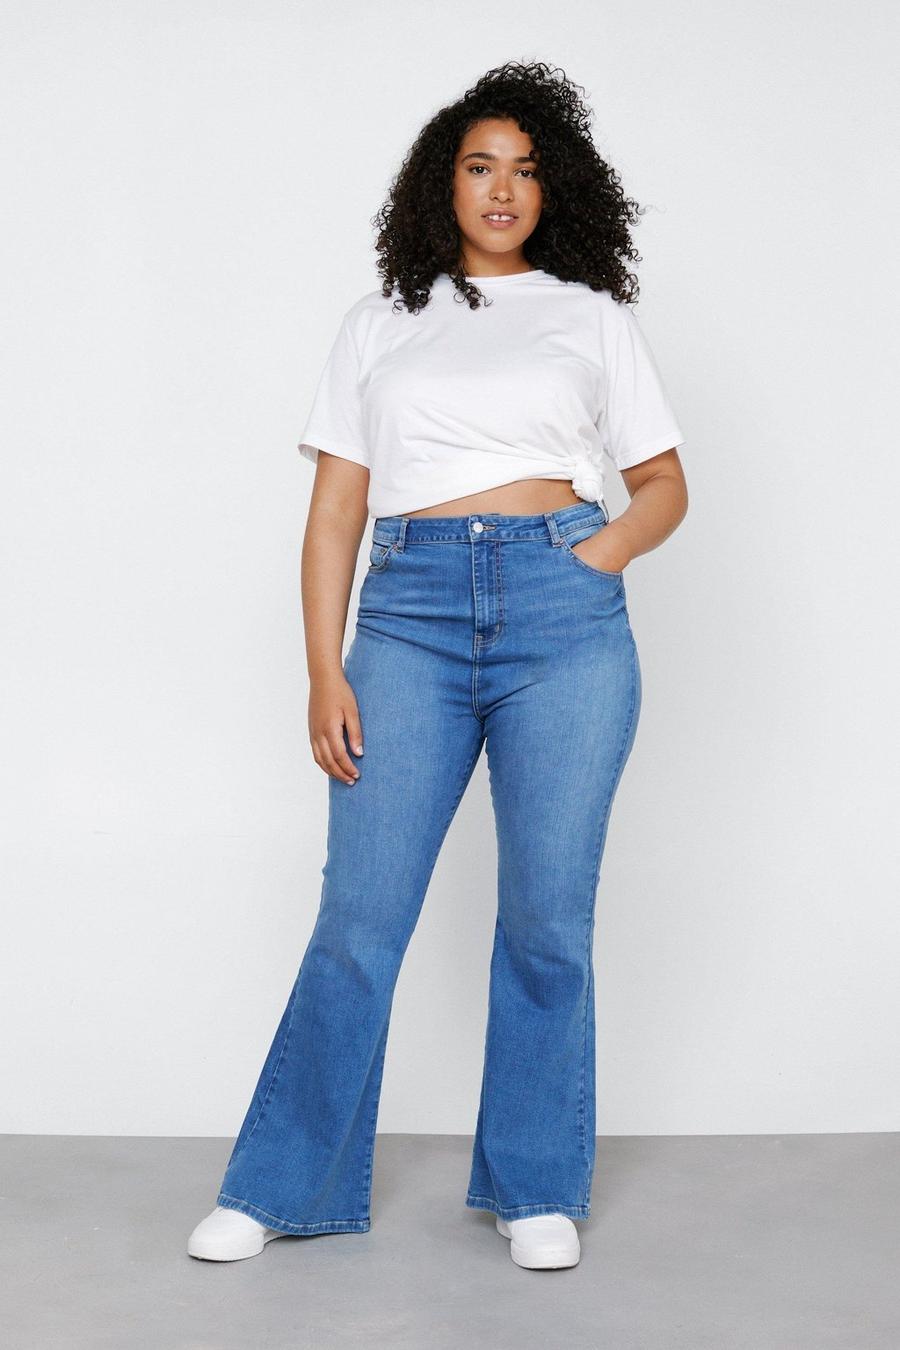 Plus Size High Waisted Stretch Denim Flare Pants